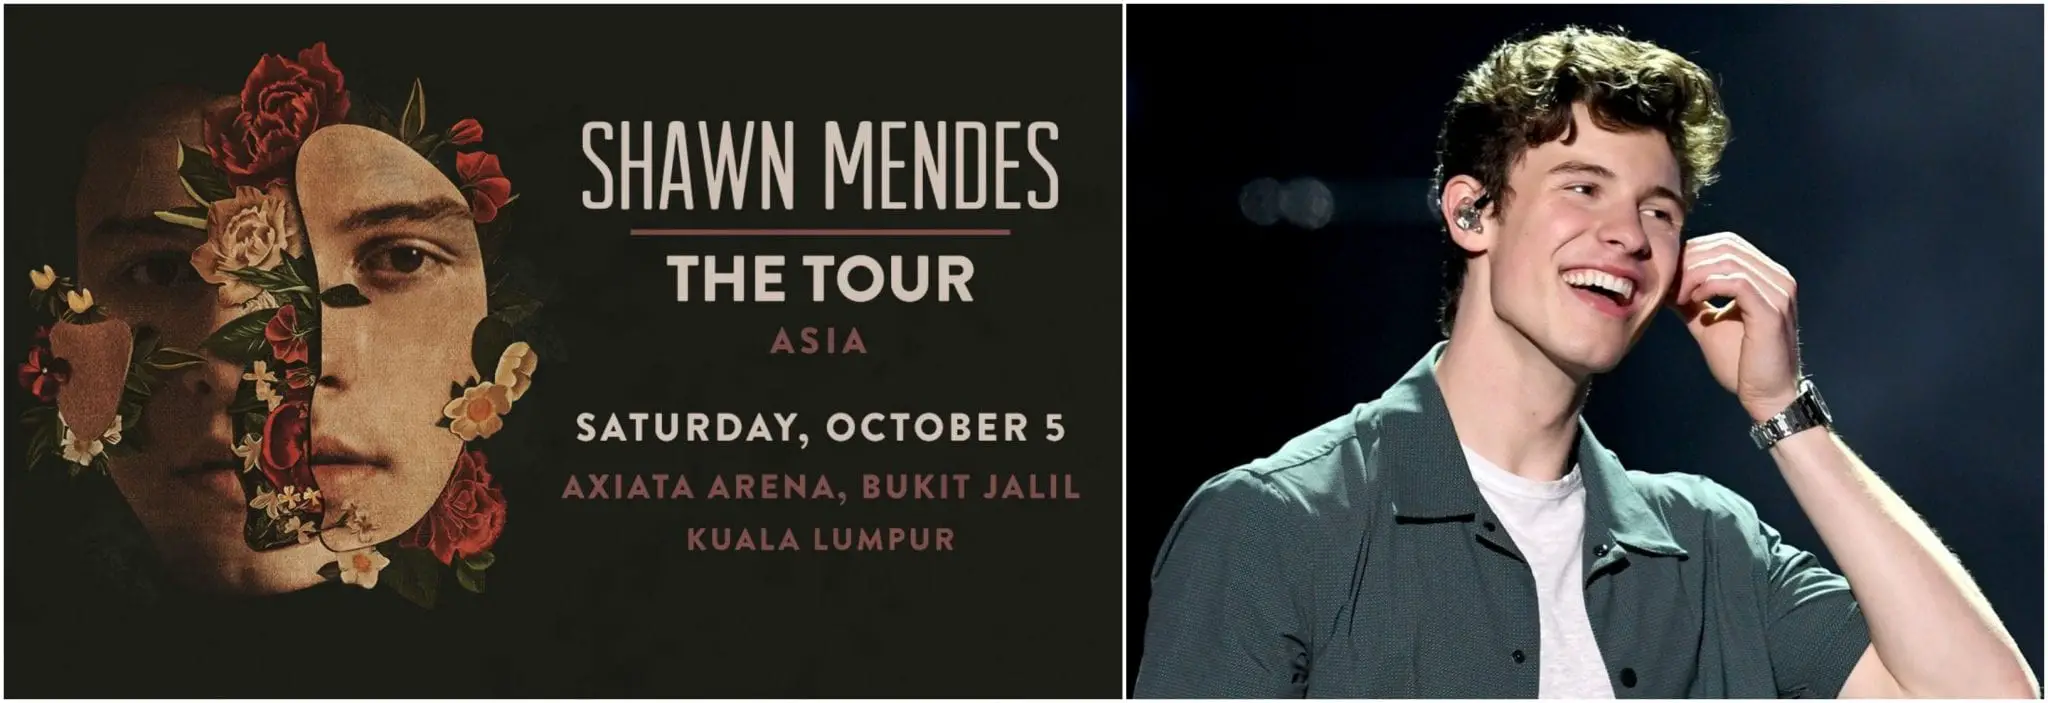 Hold On to Your Seats Because Shawn Mendes is Coming to Malaysia!